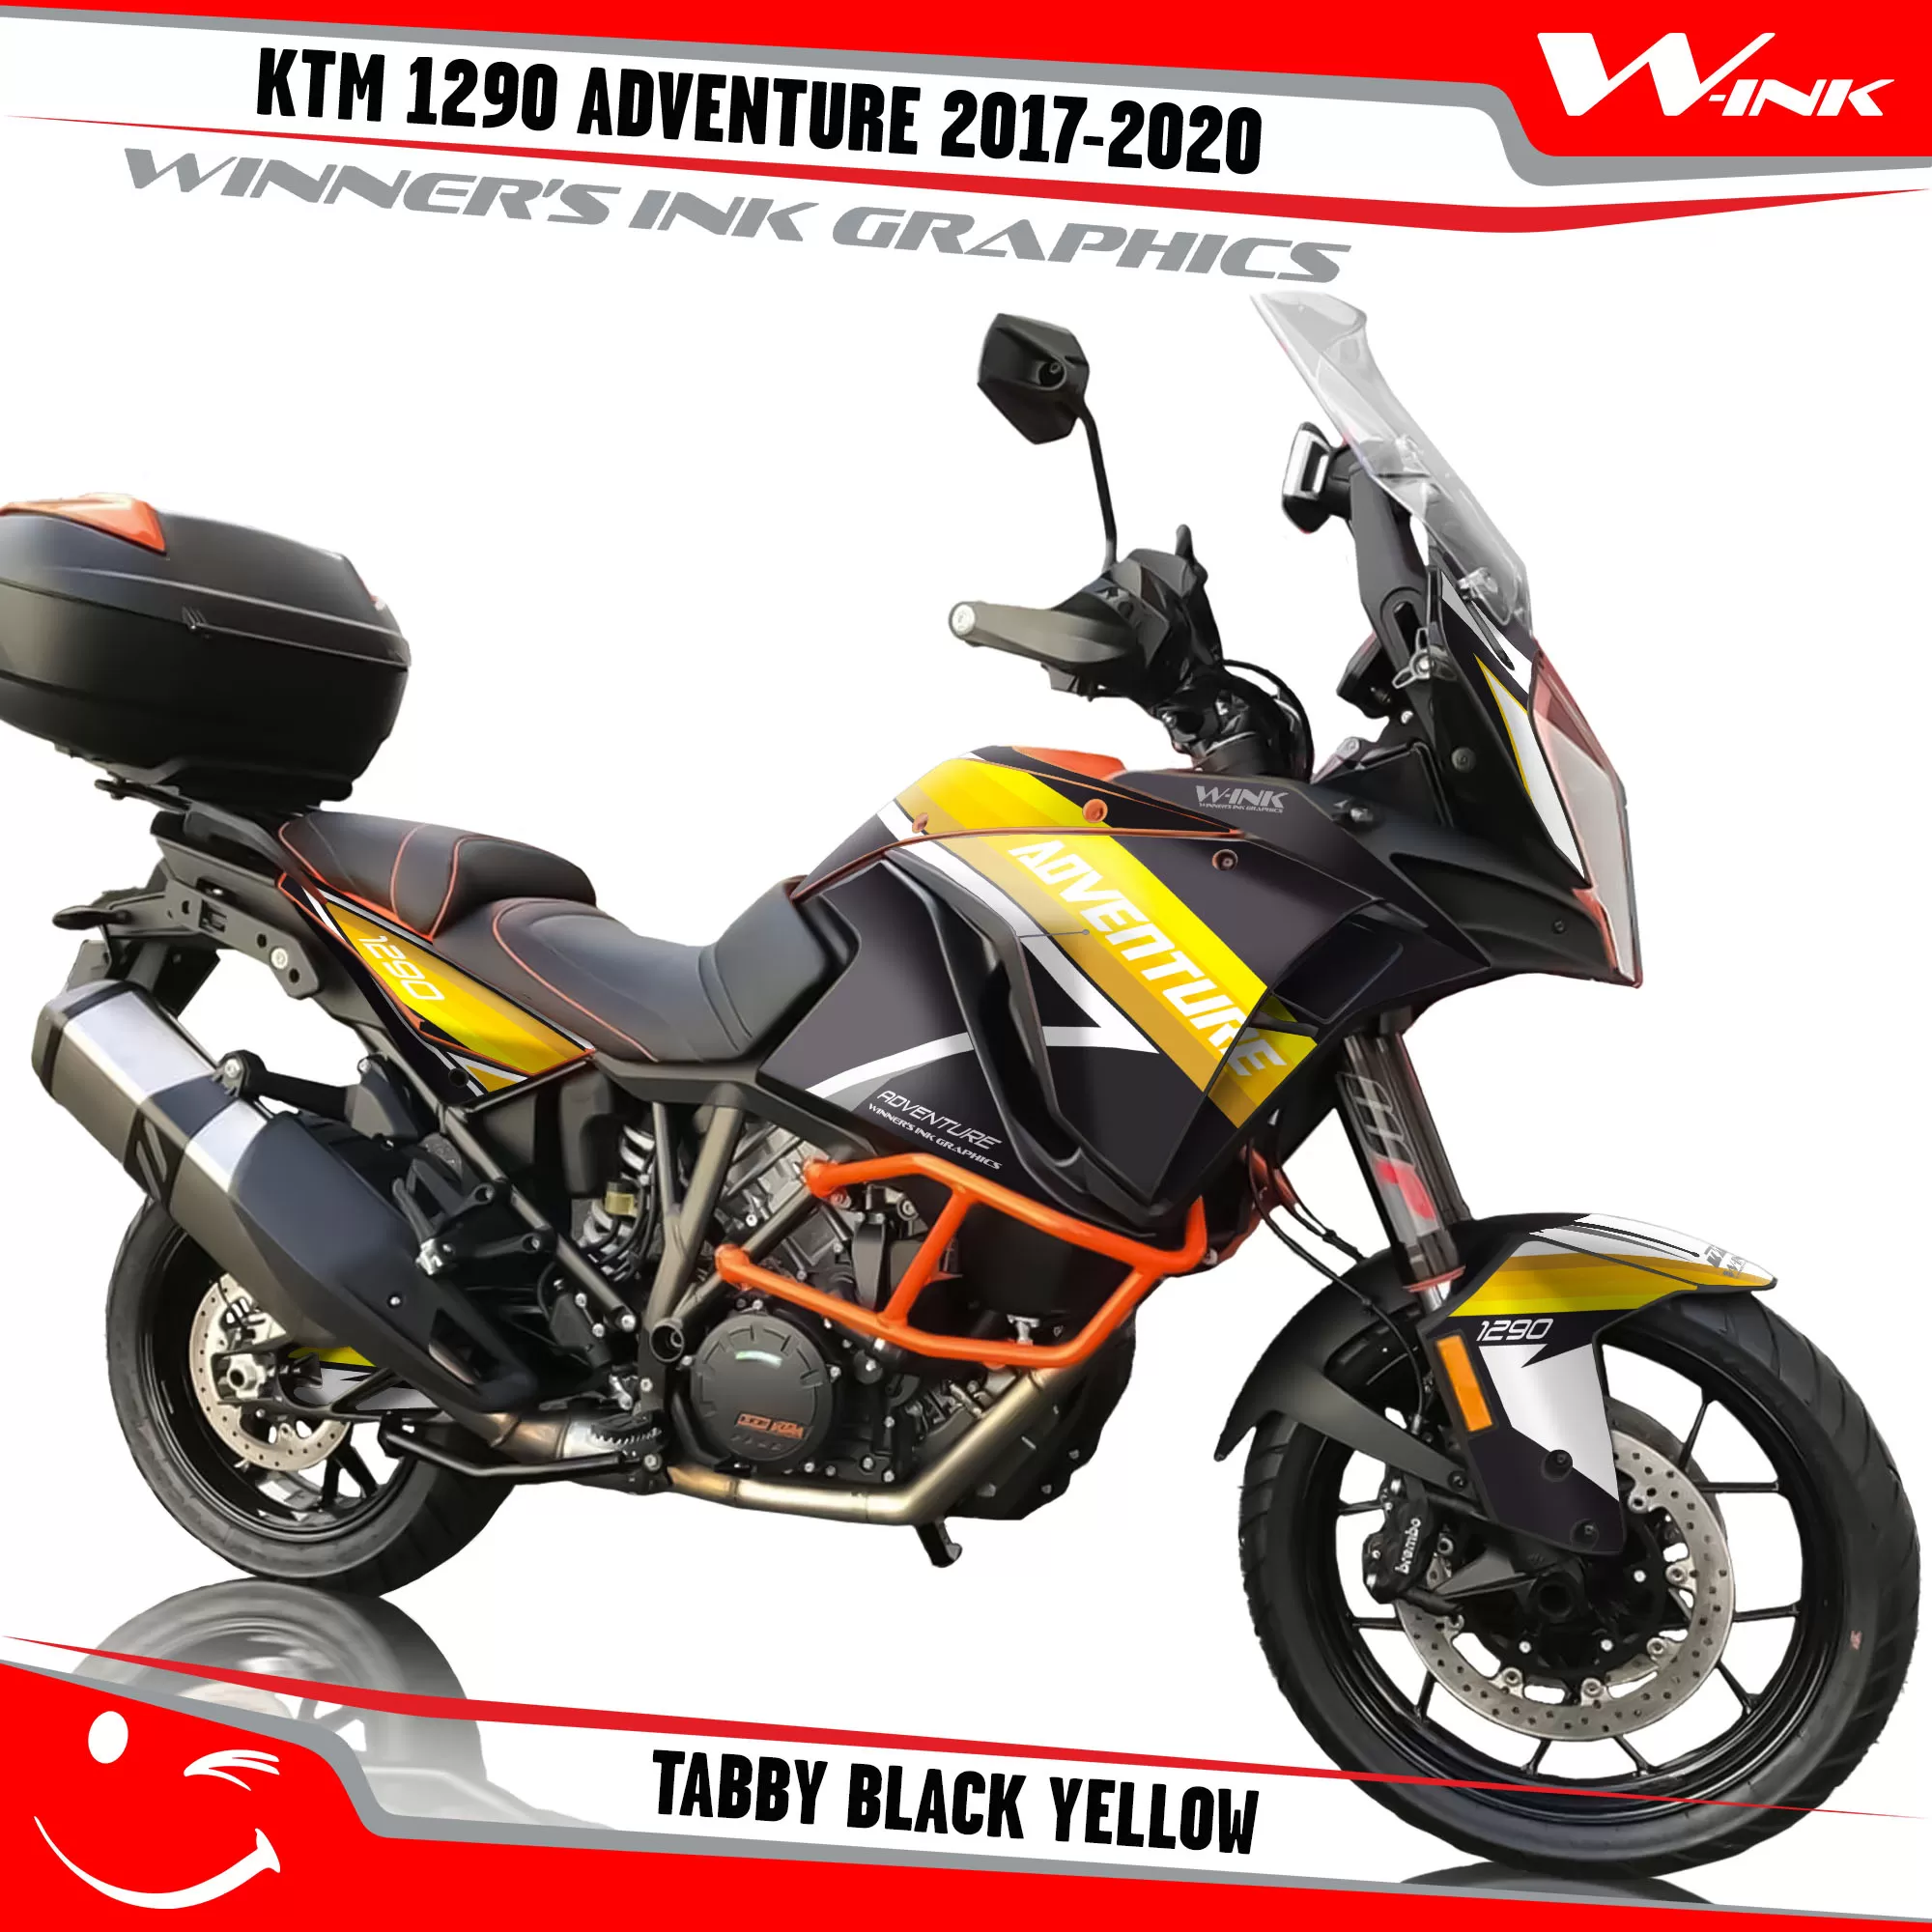 KTM-Adventure-1290-2017-2018-2019-2020-graphics-kit-and-decals-Tabby-Black-Yellow